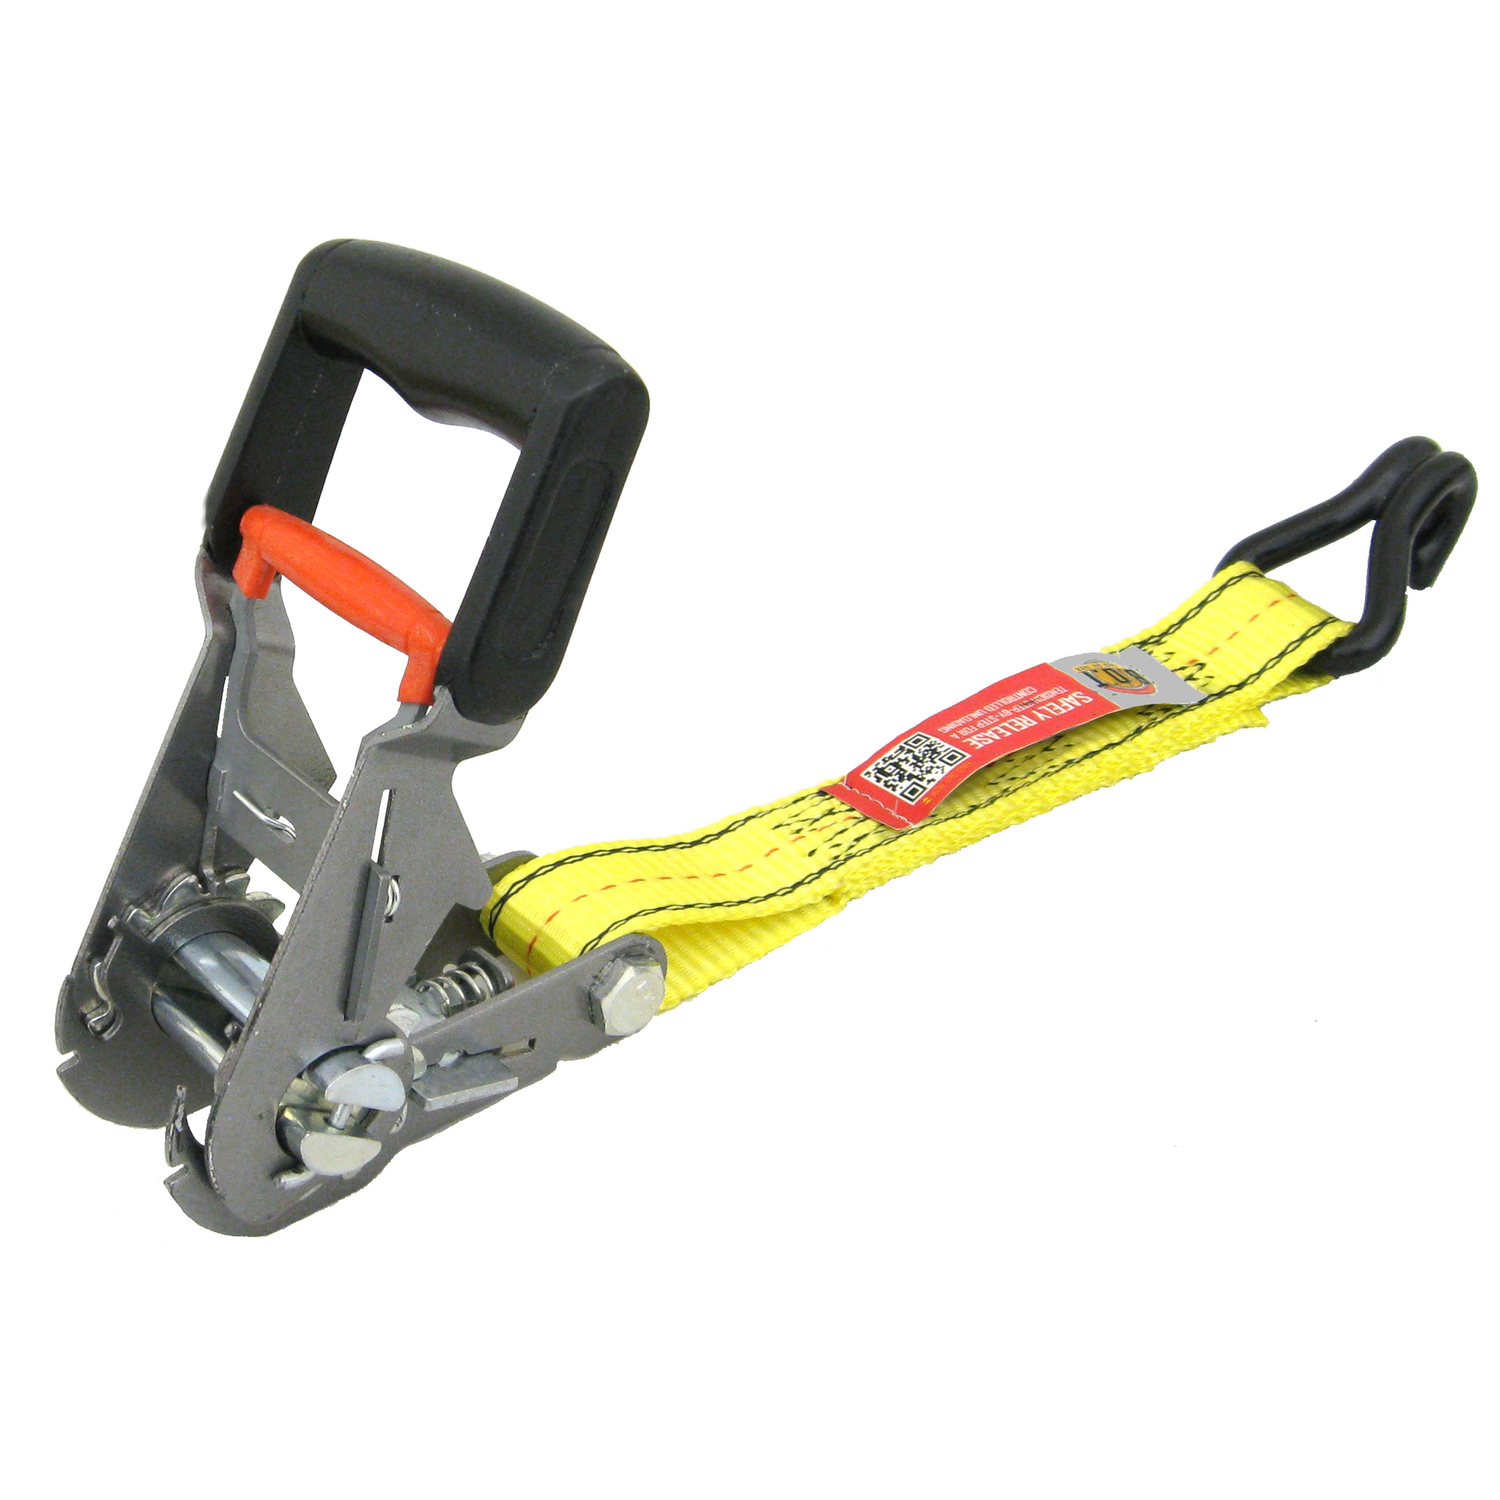 Photos - Towing Strap / Rope ProGrip 1666 lb Tie Down 350600 